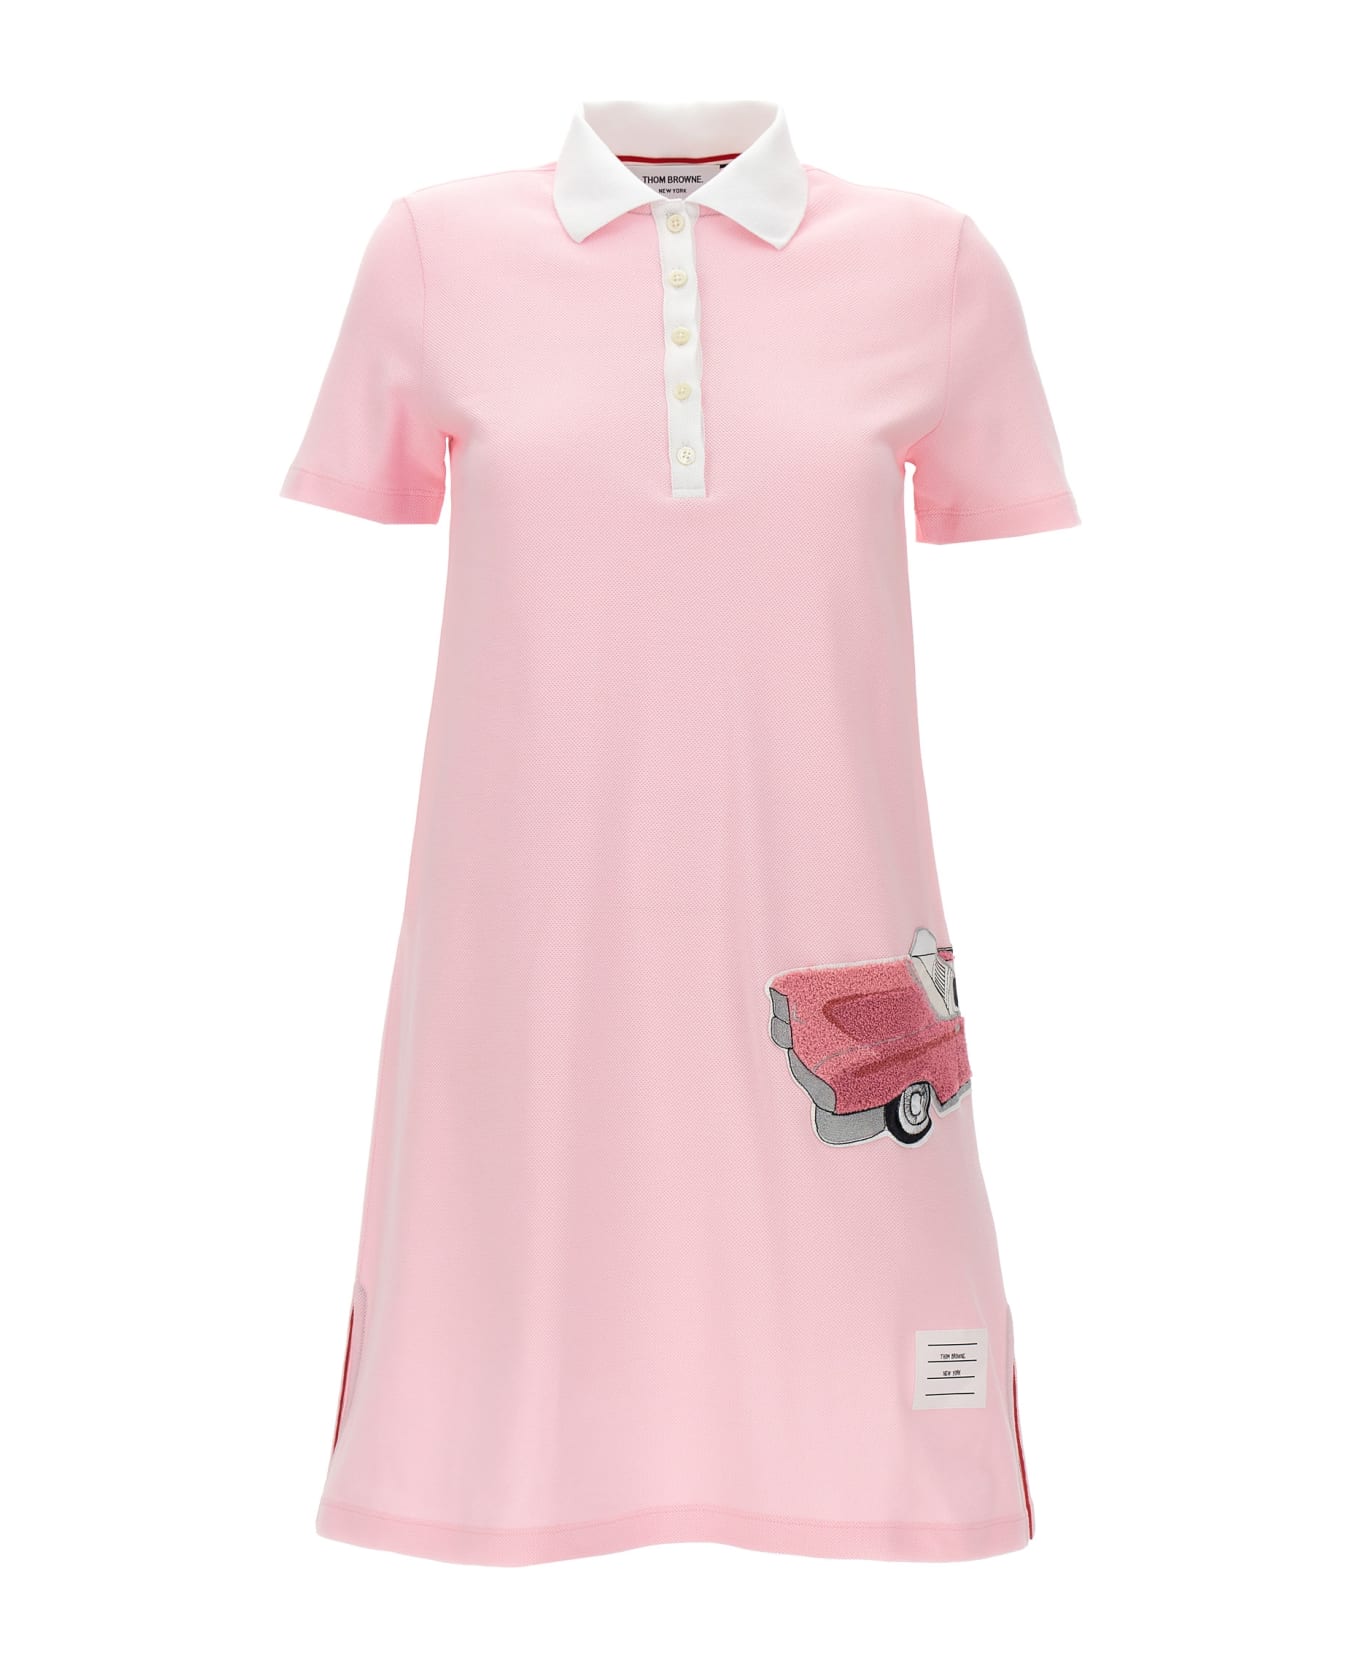 Thom Browne Patch Polo Dress - Pink